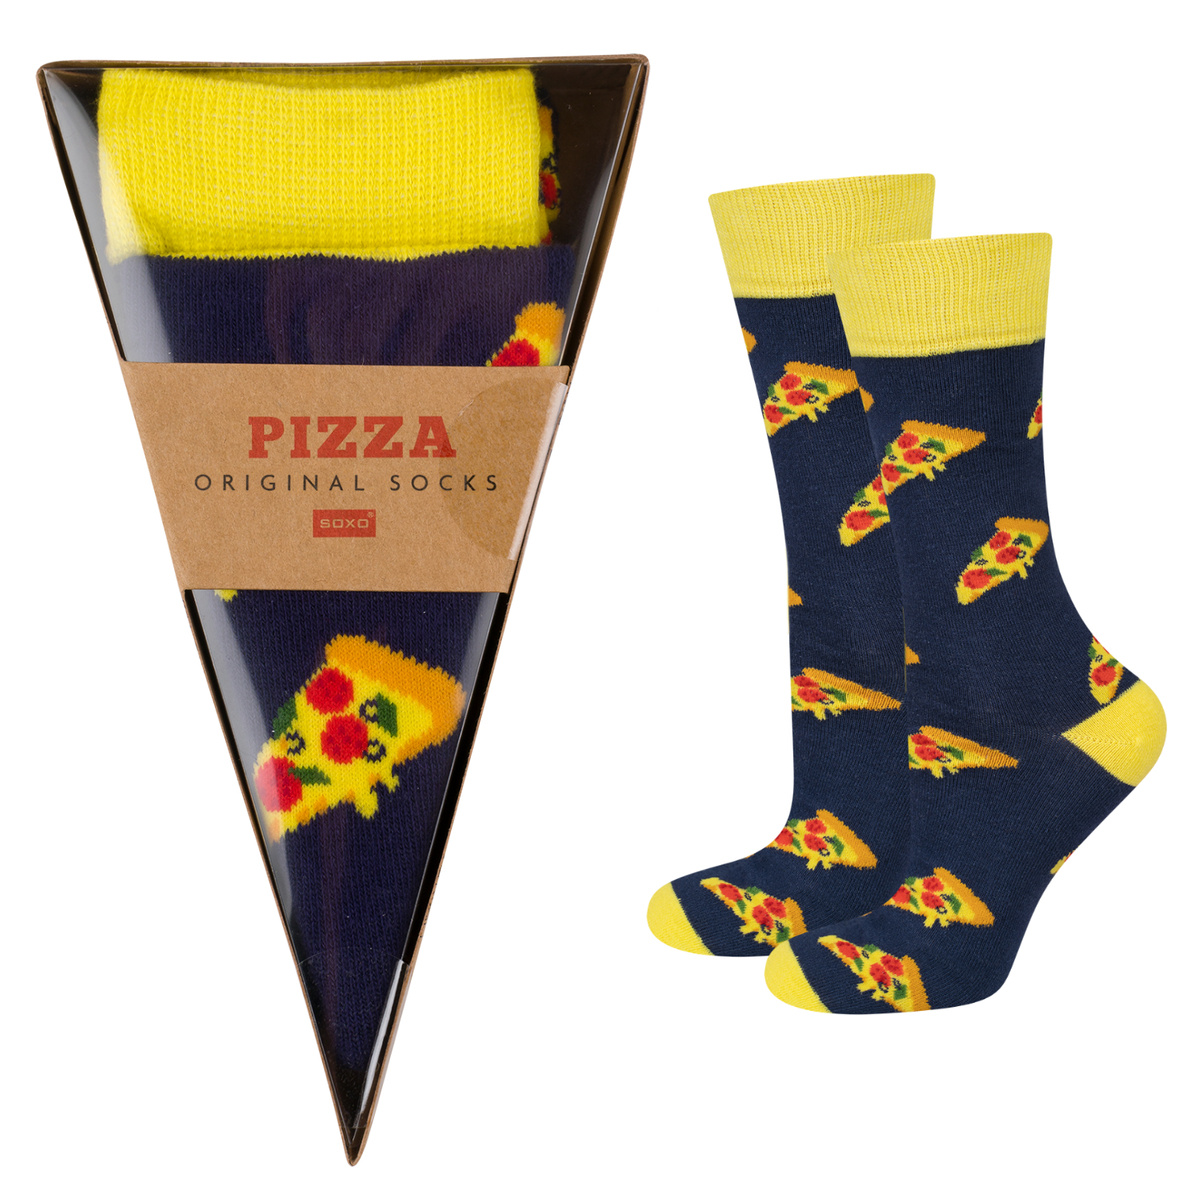 Pizza socks in a package for Her and Him